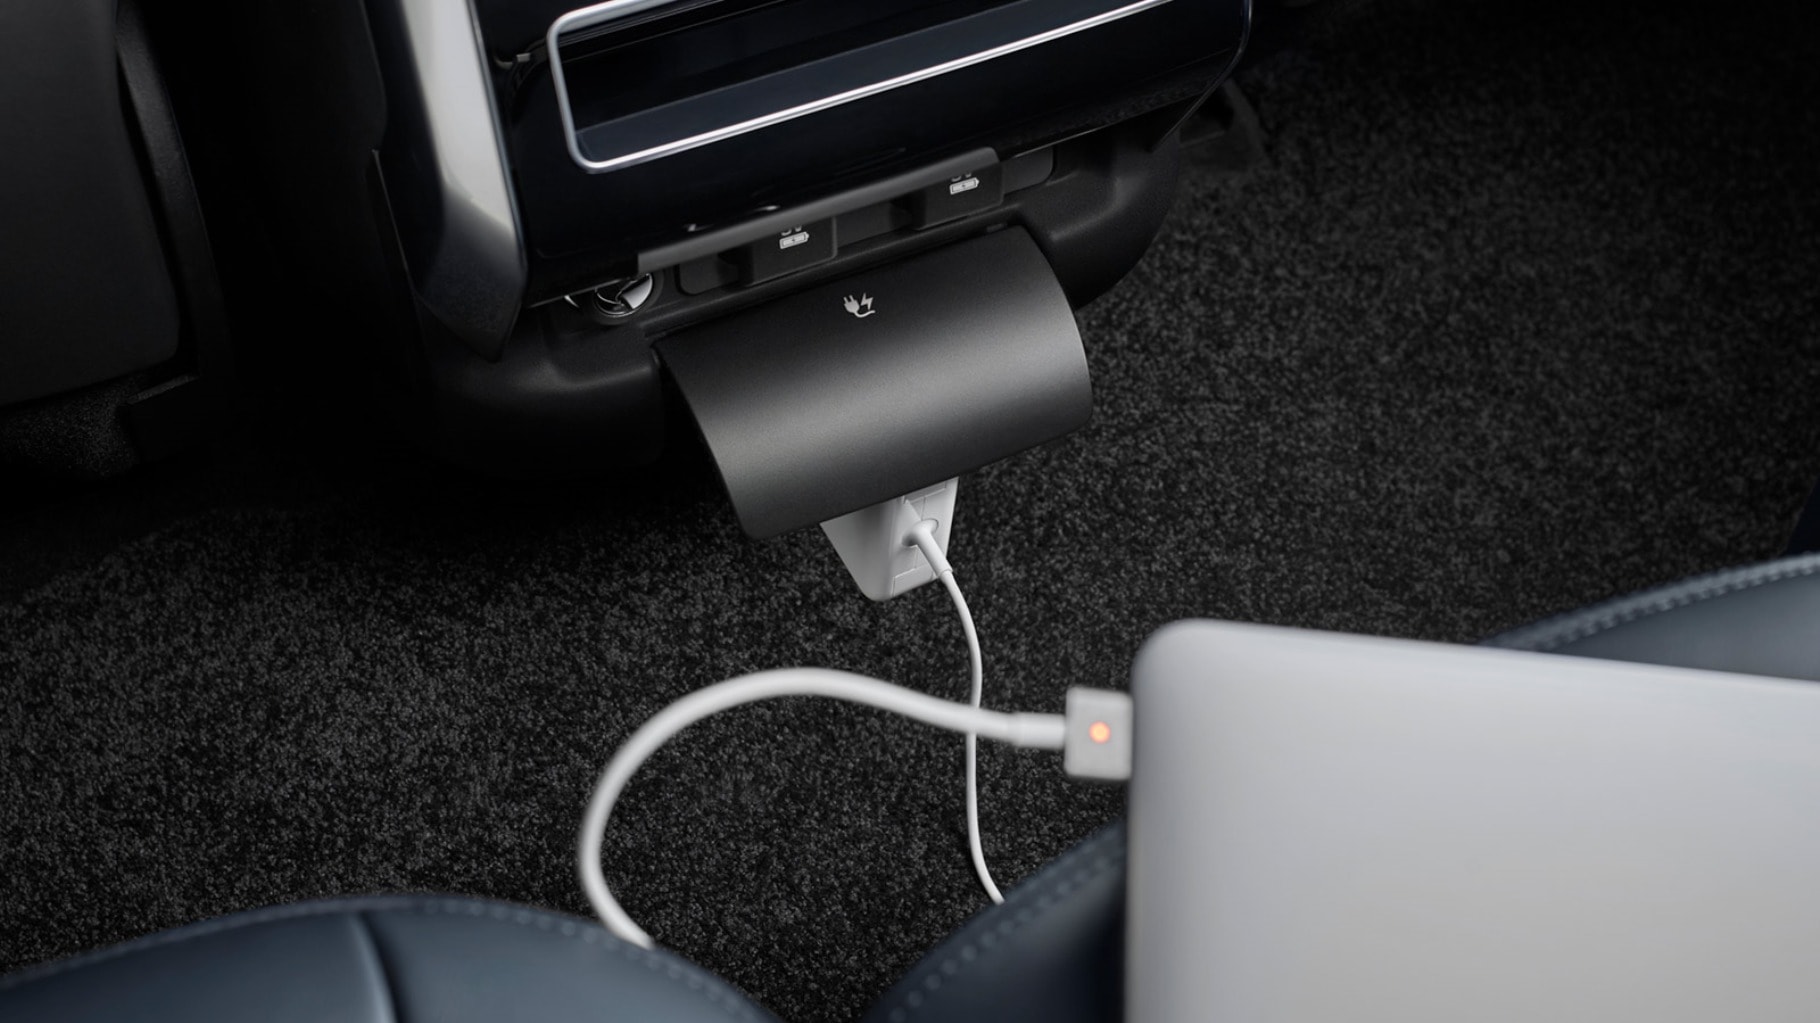 Range Rover Sport is available with two optional domestic plug sockets and five USB ports located throughout the cabin. 